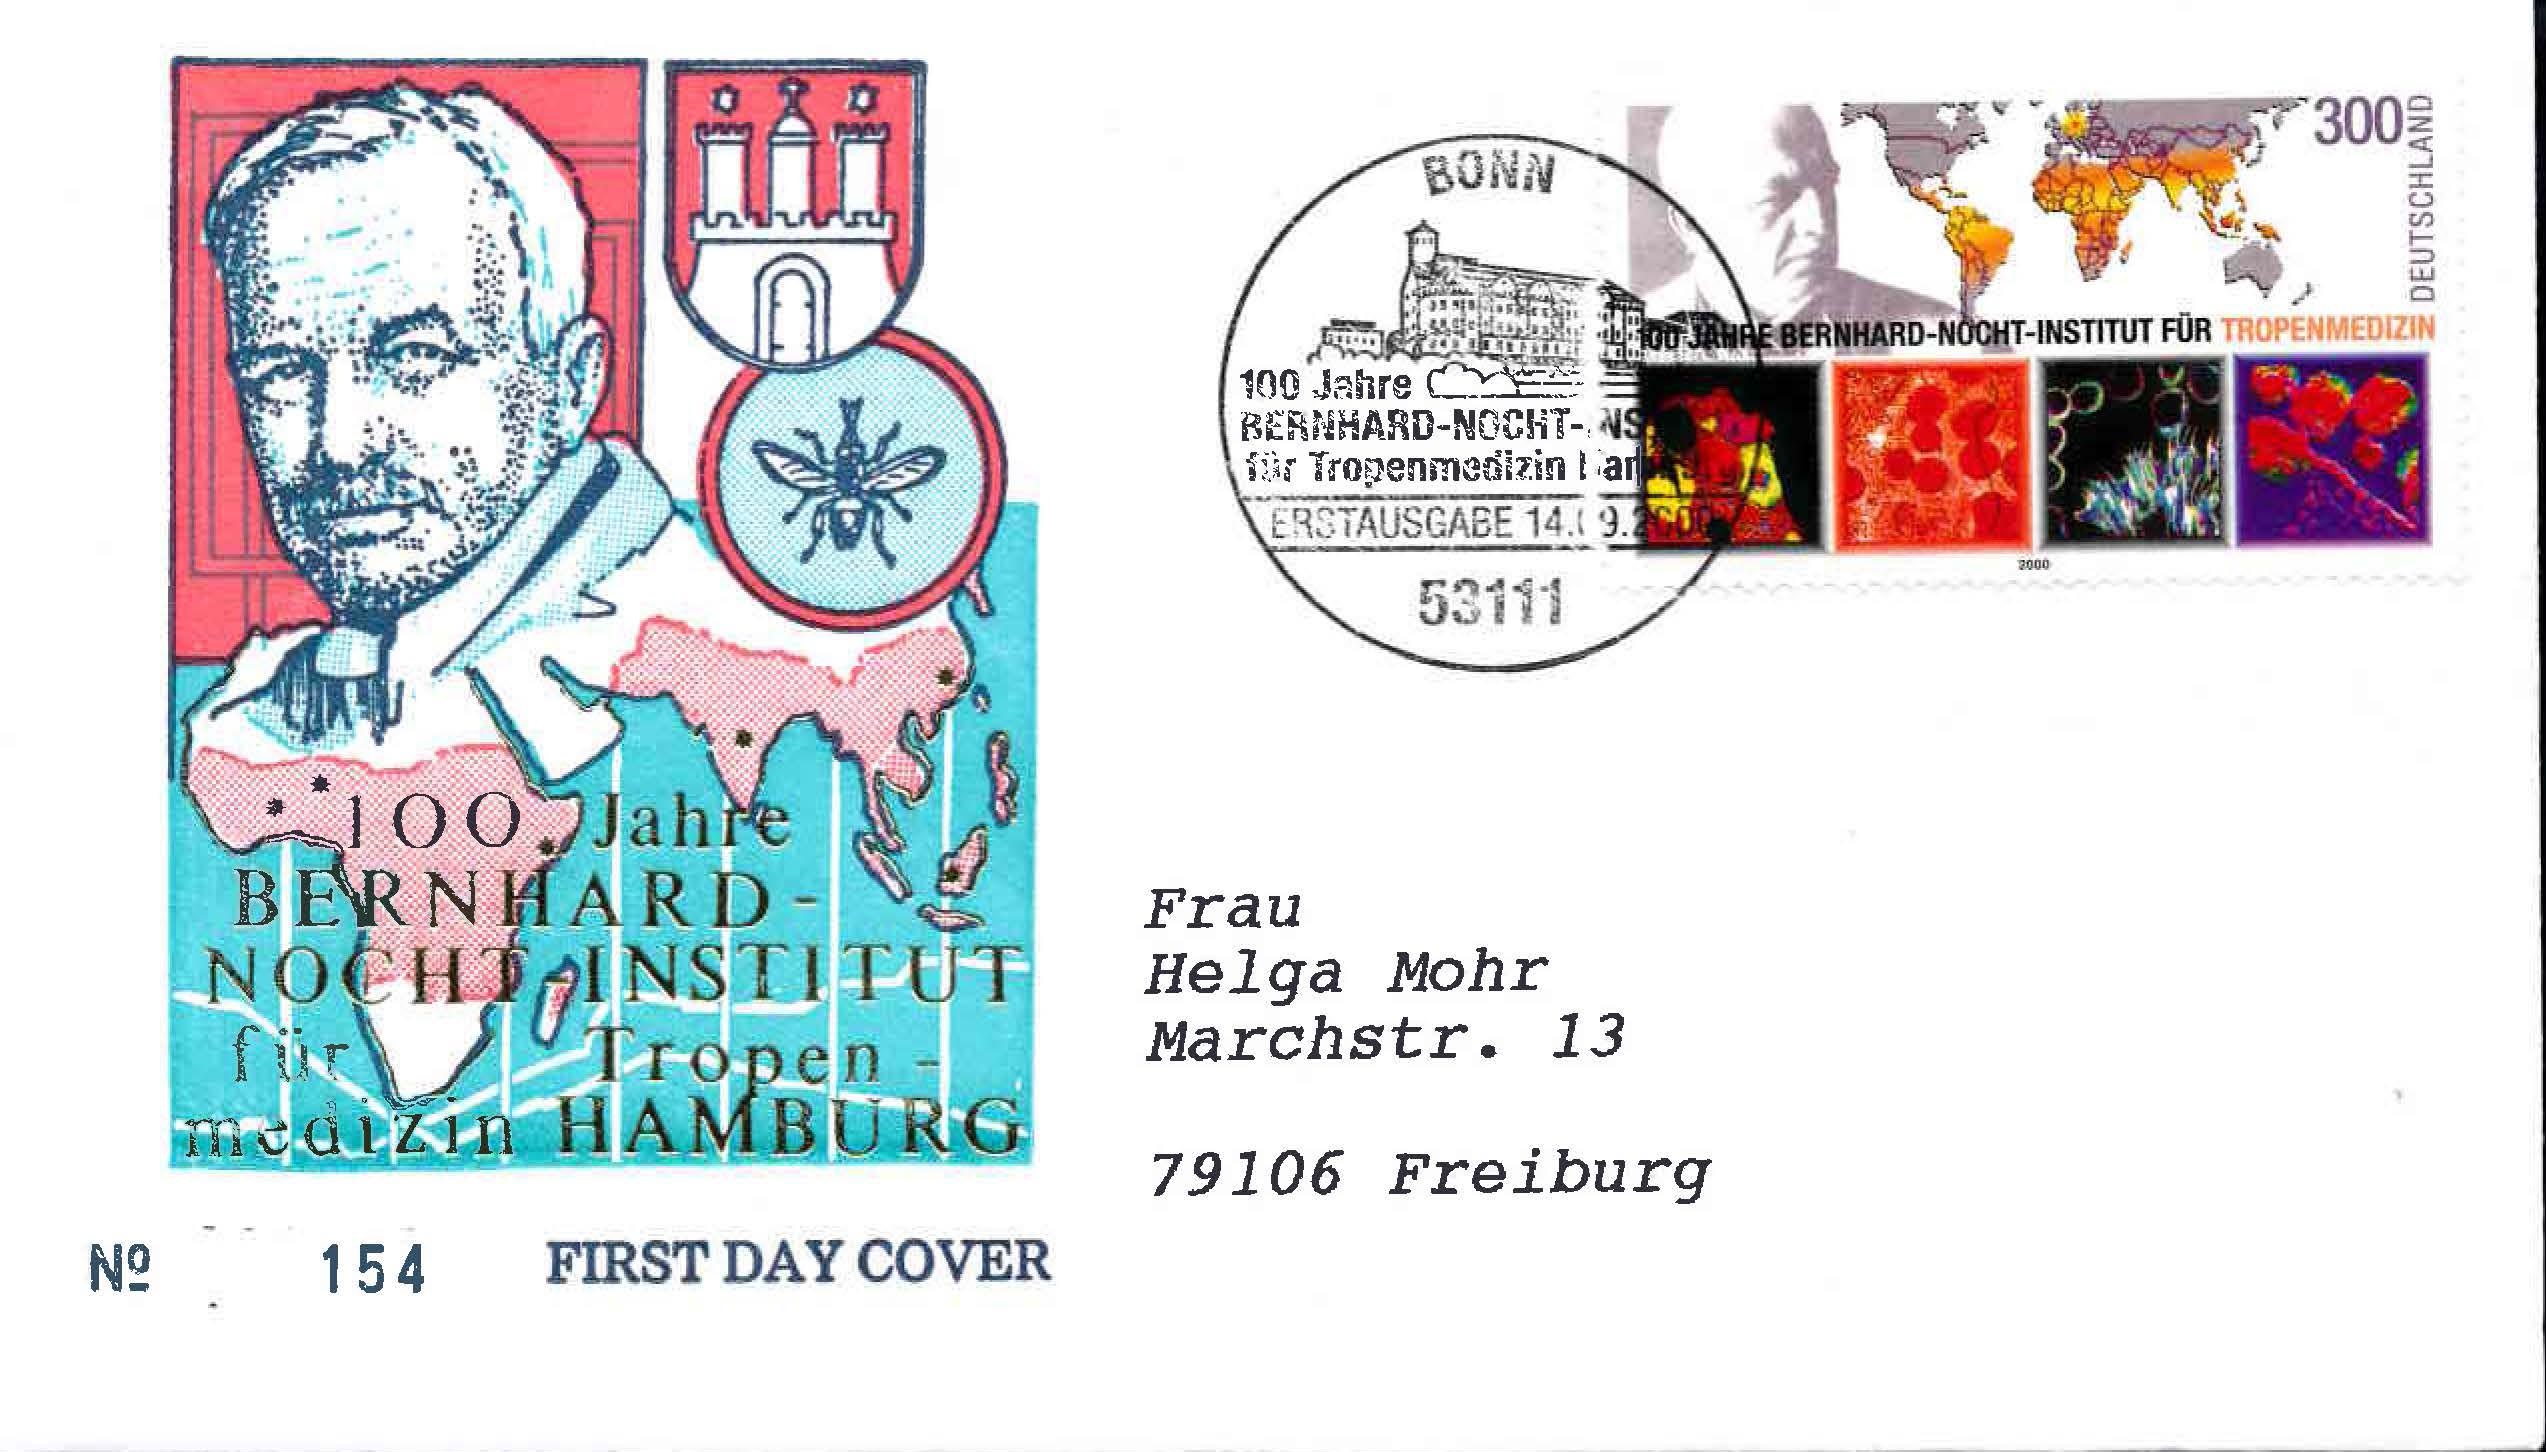 Germany Scott 2101 First Day Cover, Cachet 3, Bonn Cancellation - Sent Through the Mail to Freiburg